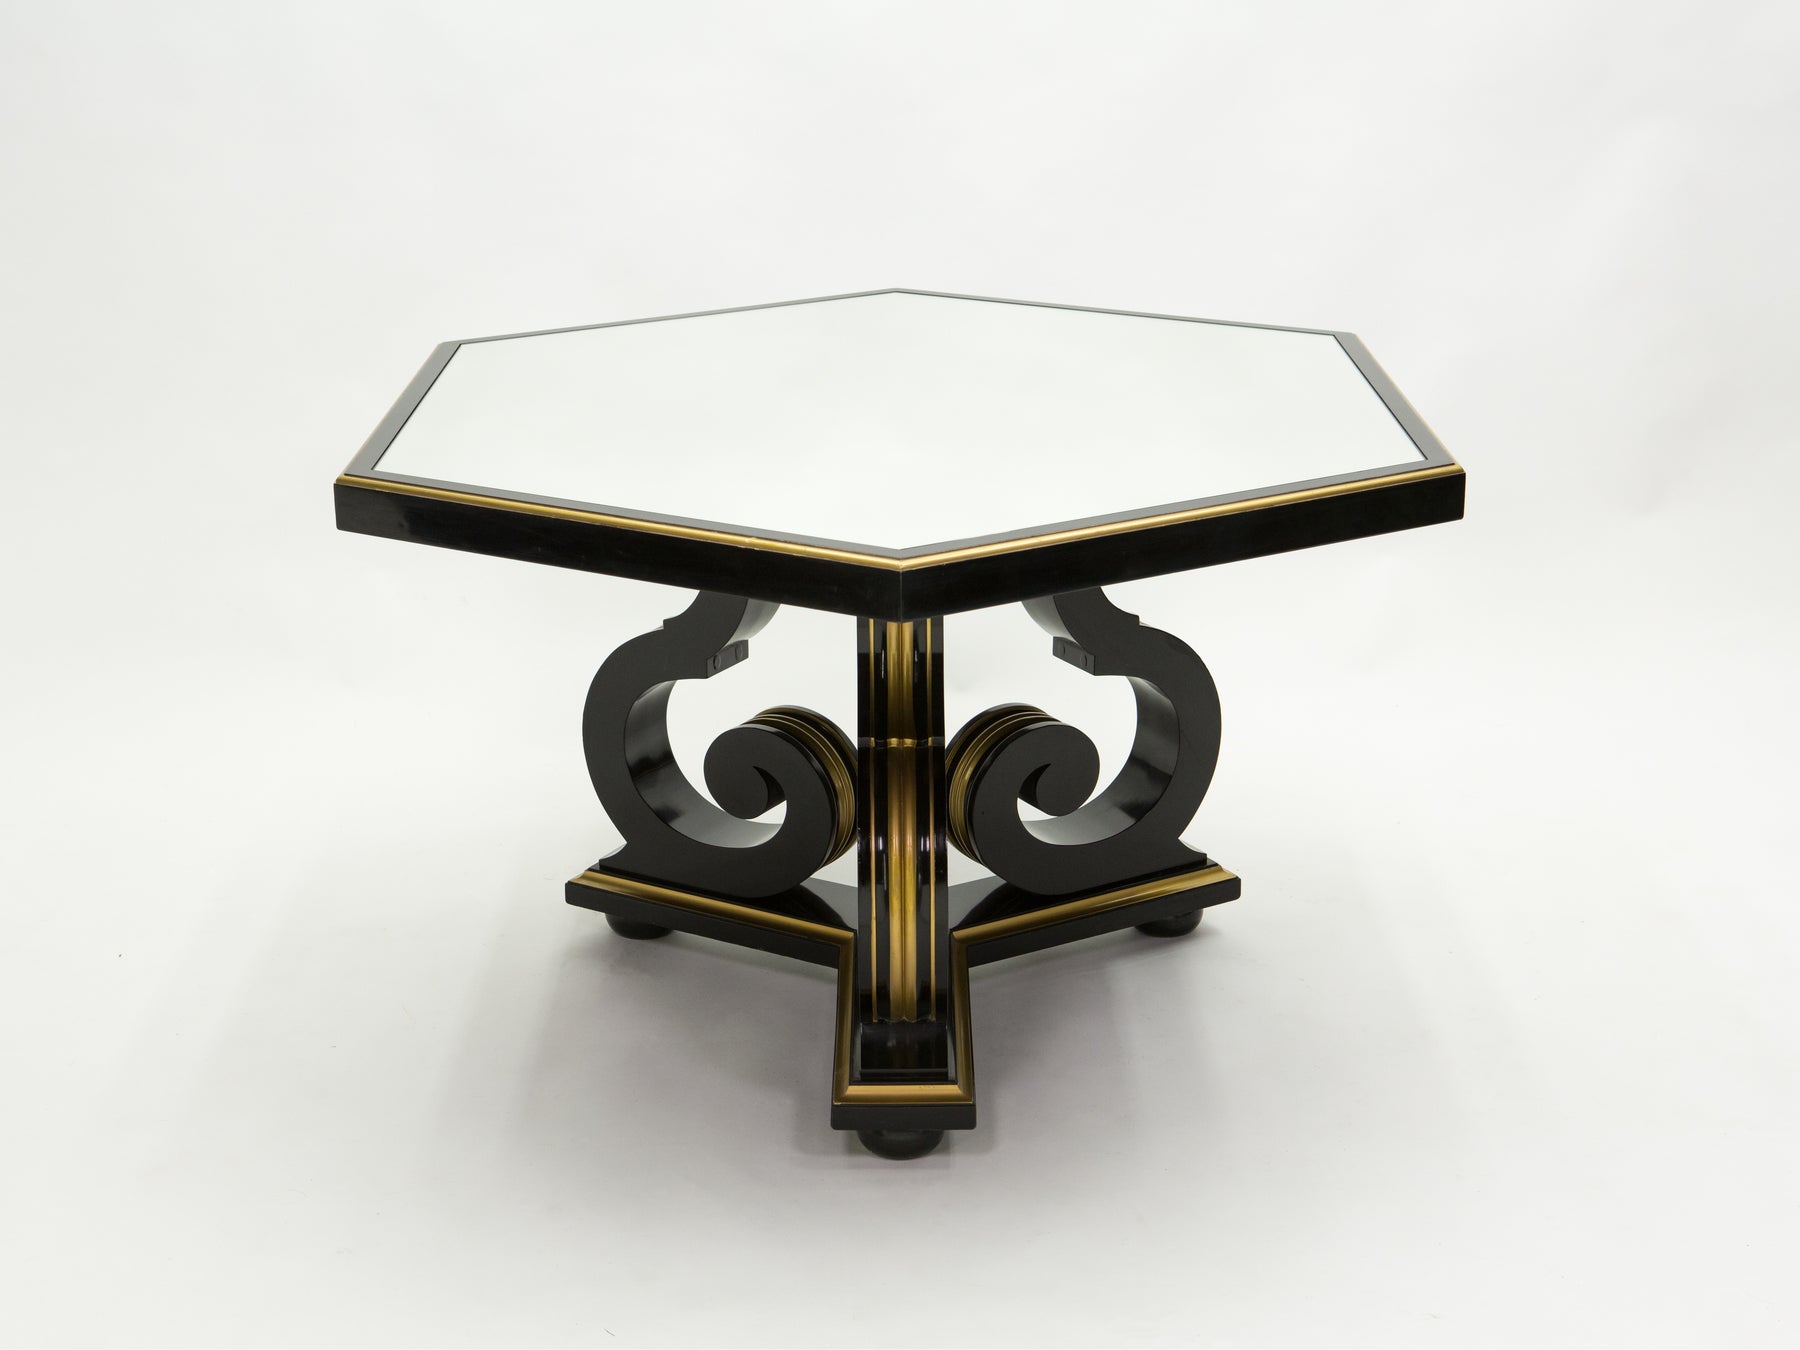 French Neoclassical Maurice Hirsch black gilded mirror table 1970s